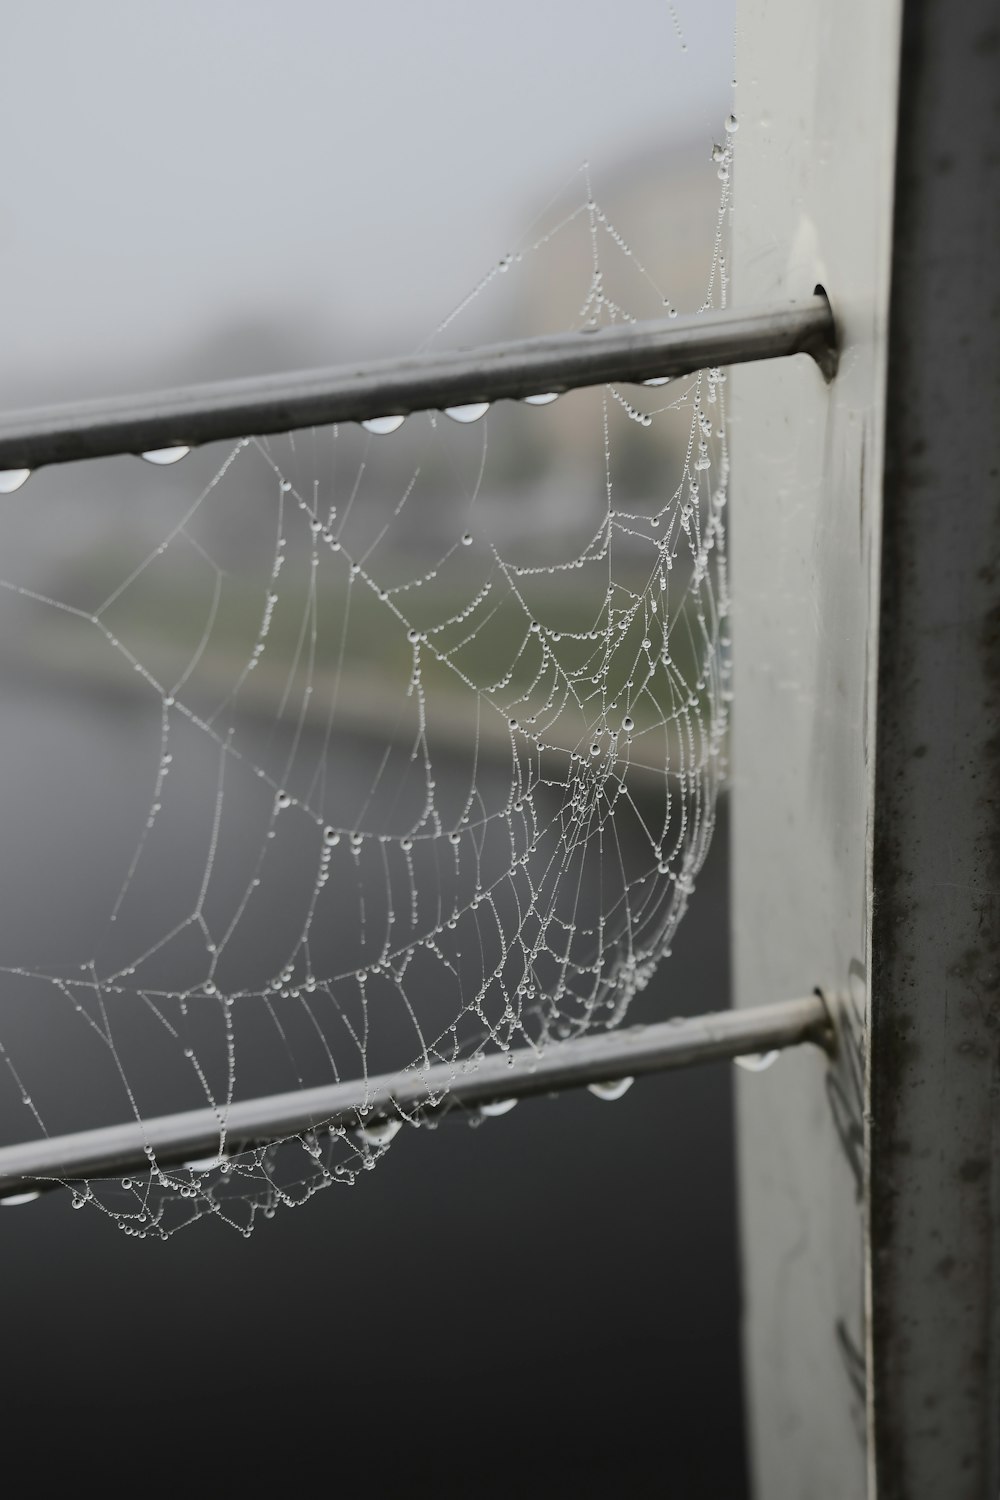 a spider web hanging from a metal railing